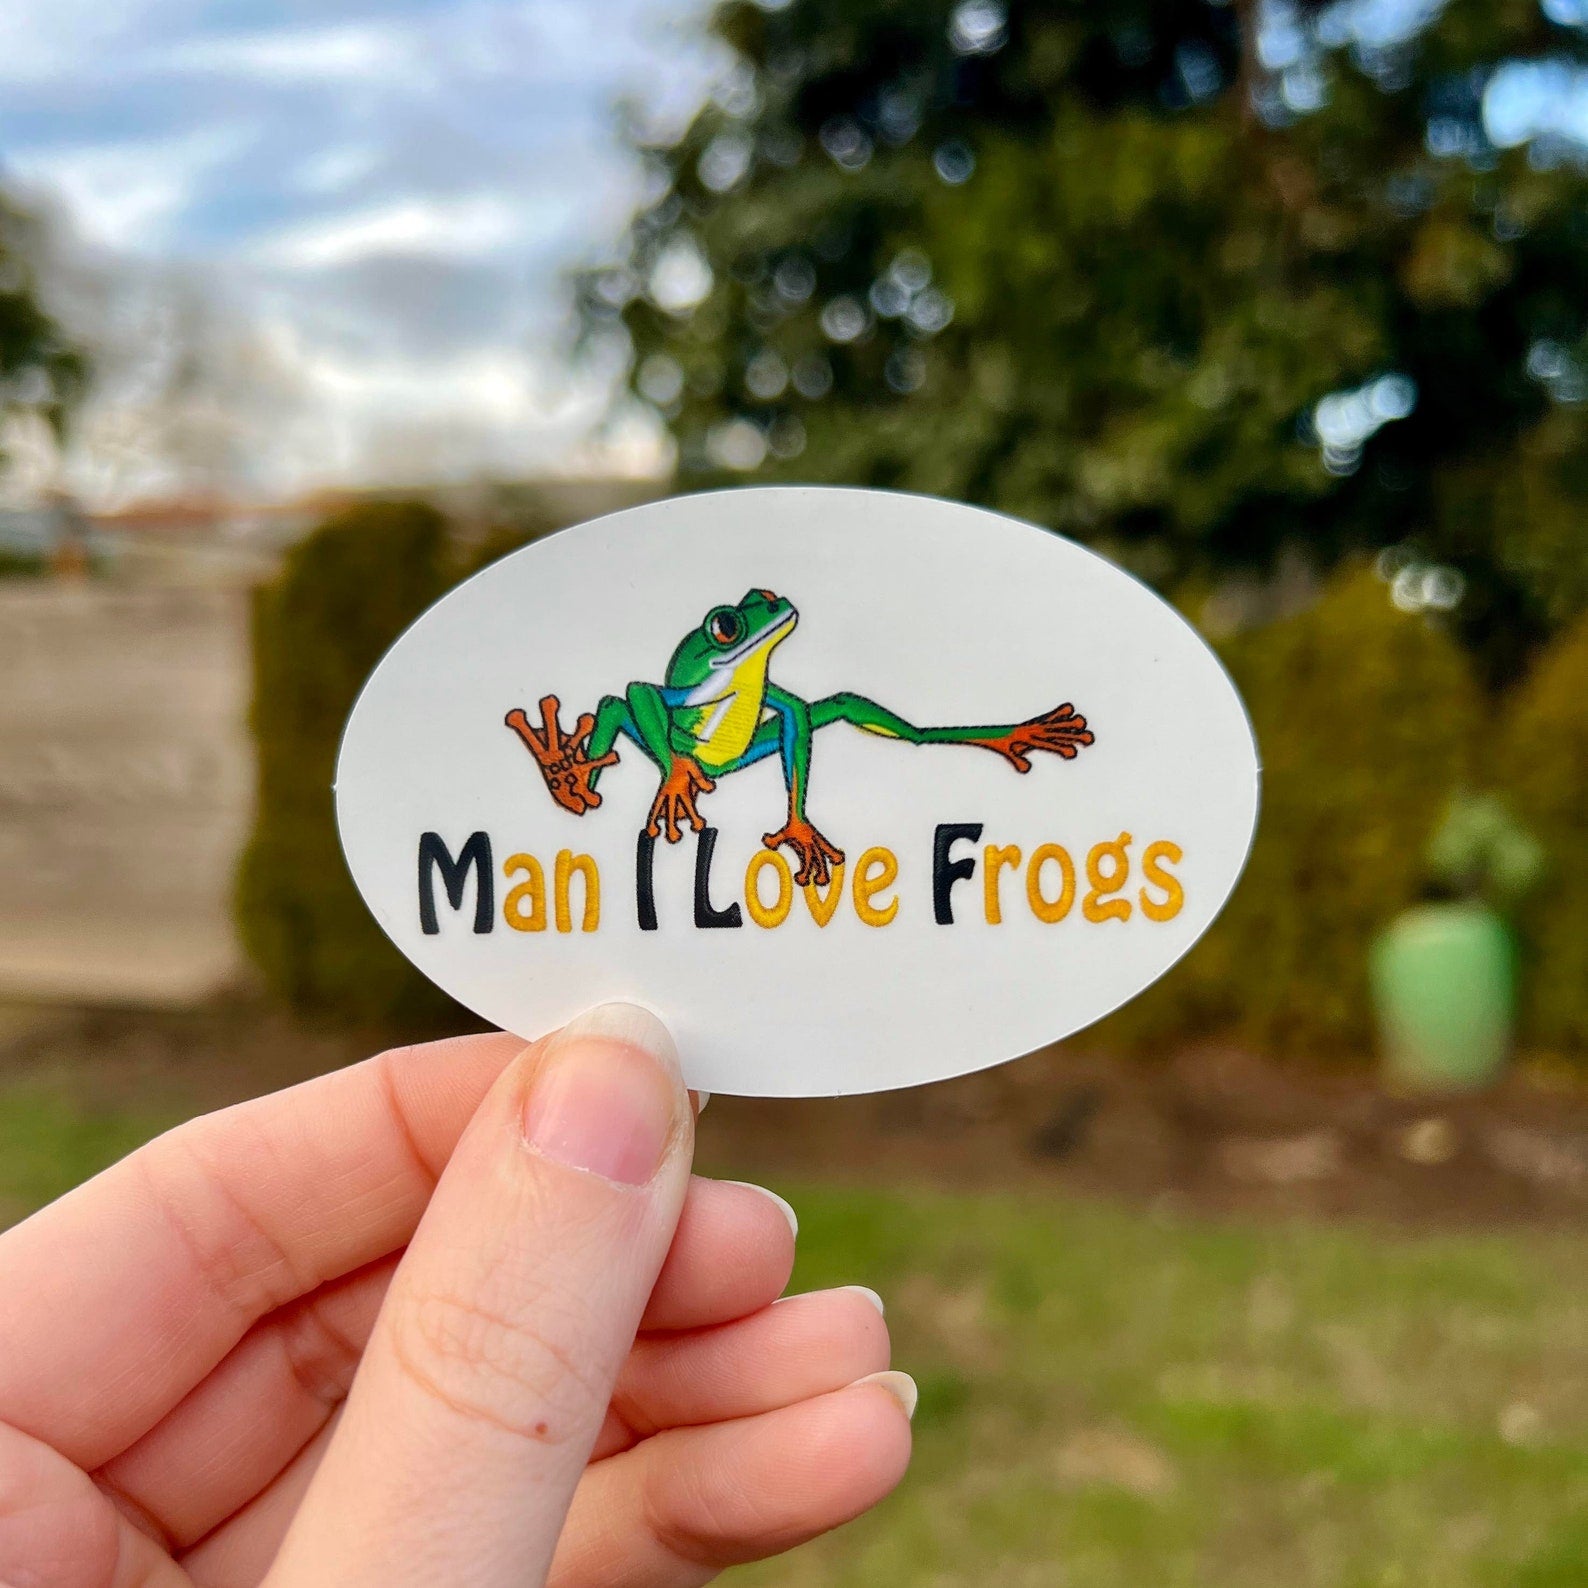 Man I Love Frogs MILF Clear Embroidery Sticker